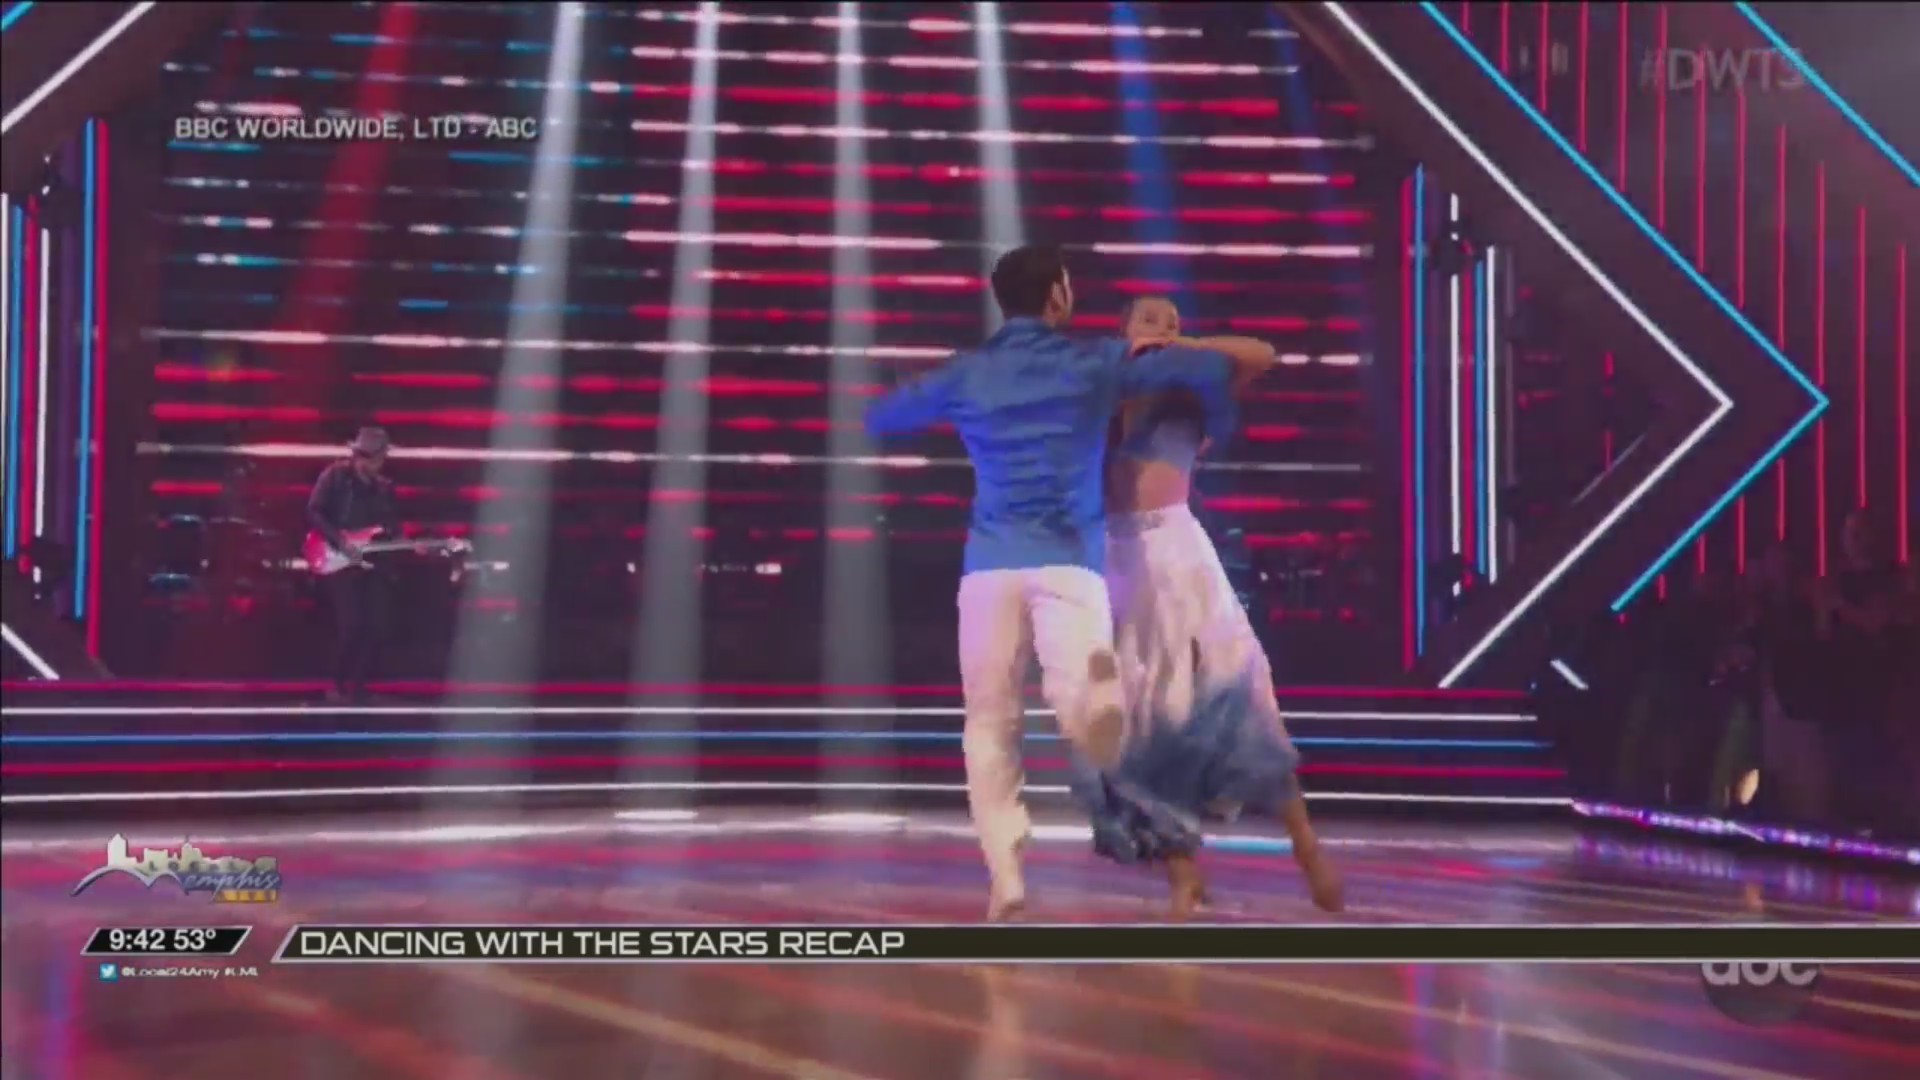 FRED ASTAIRE - DANCING WITH THE STARS RECAP